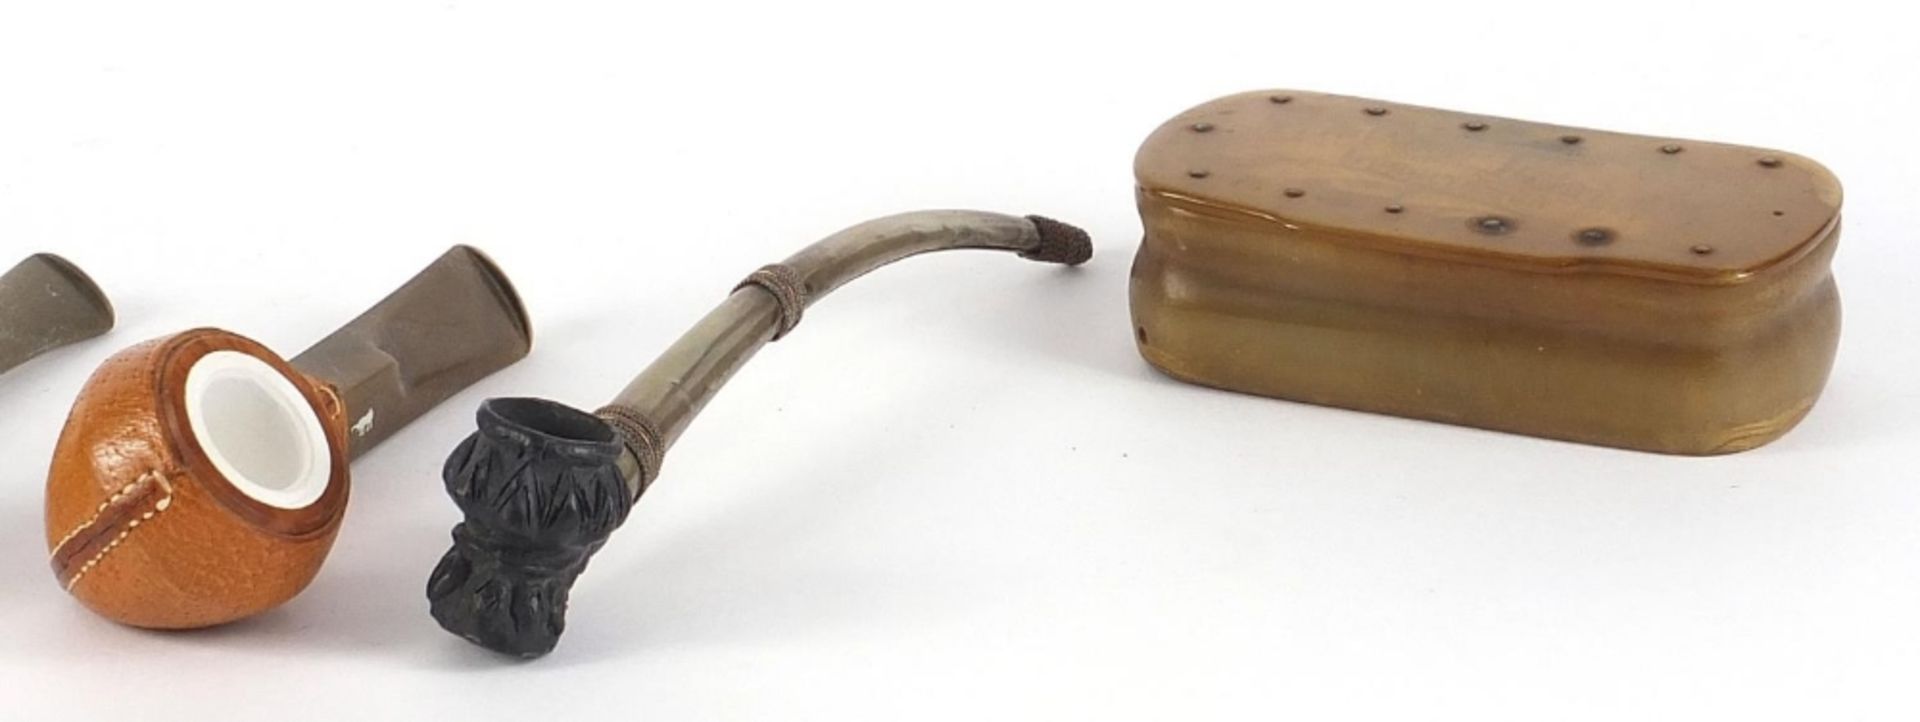 Smoking objects including an antique horn snuff box and a Meerschaum pipe with amber coloured - Bild 3 aus 6